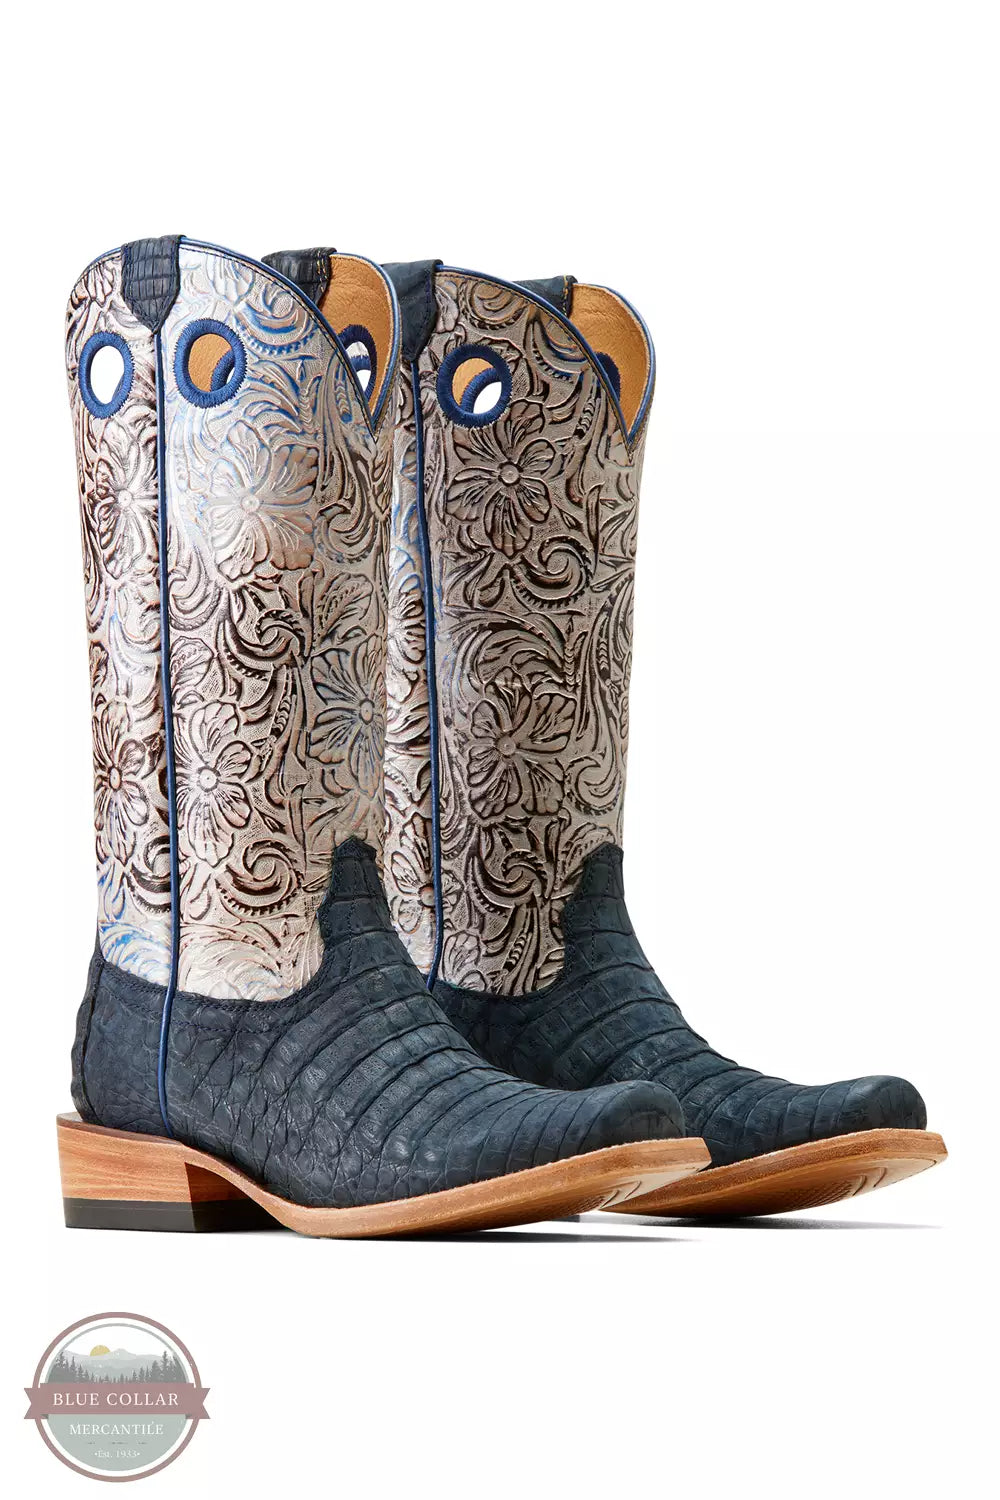 Ariat 10050966 Futurity Boon Tooled Western Boot in Navy Sueded Caiman Belly Pair Profile View